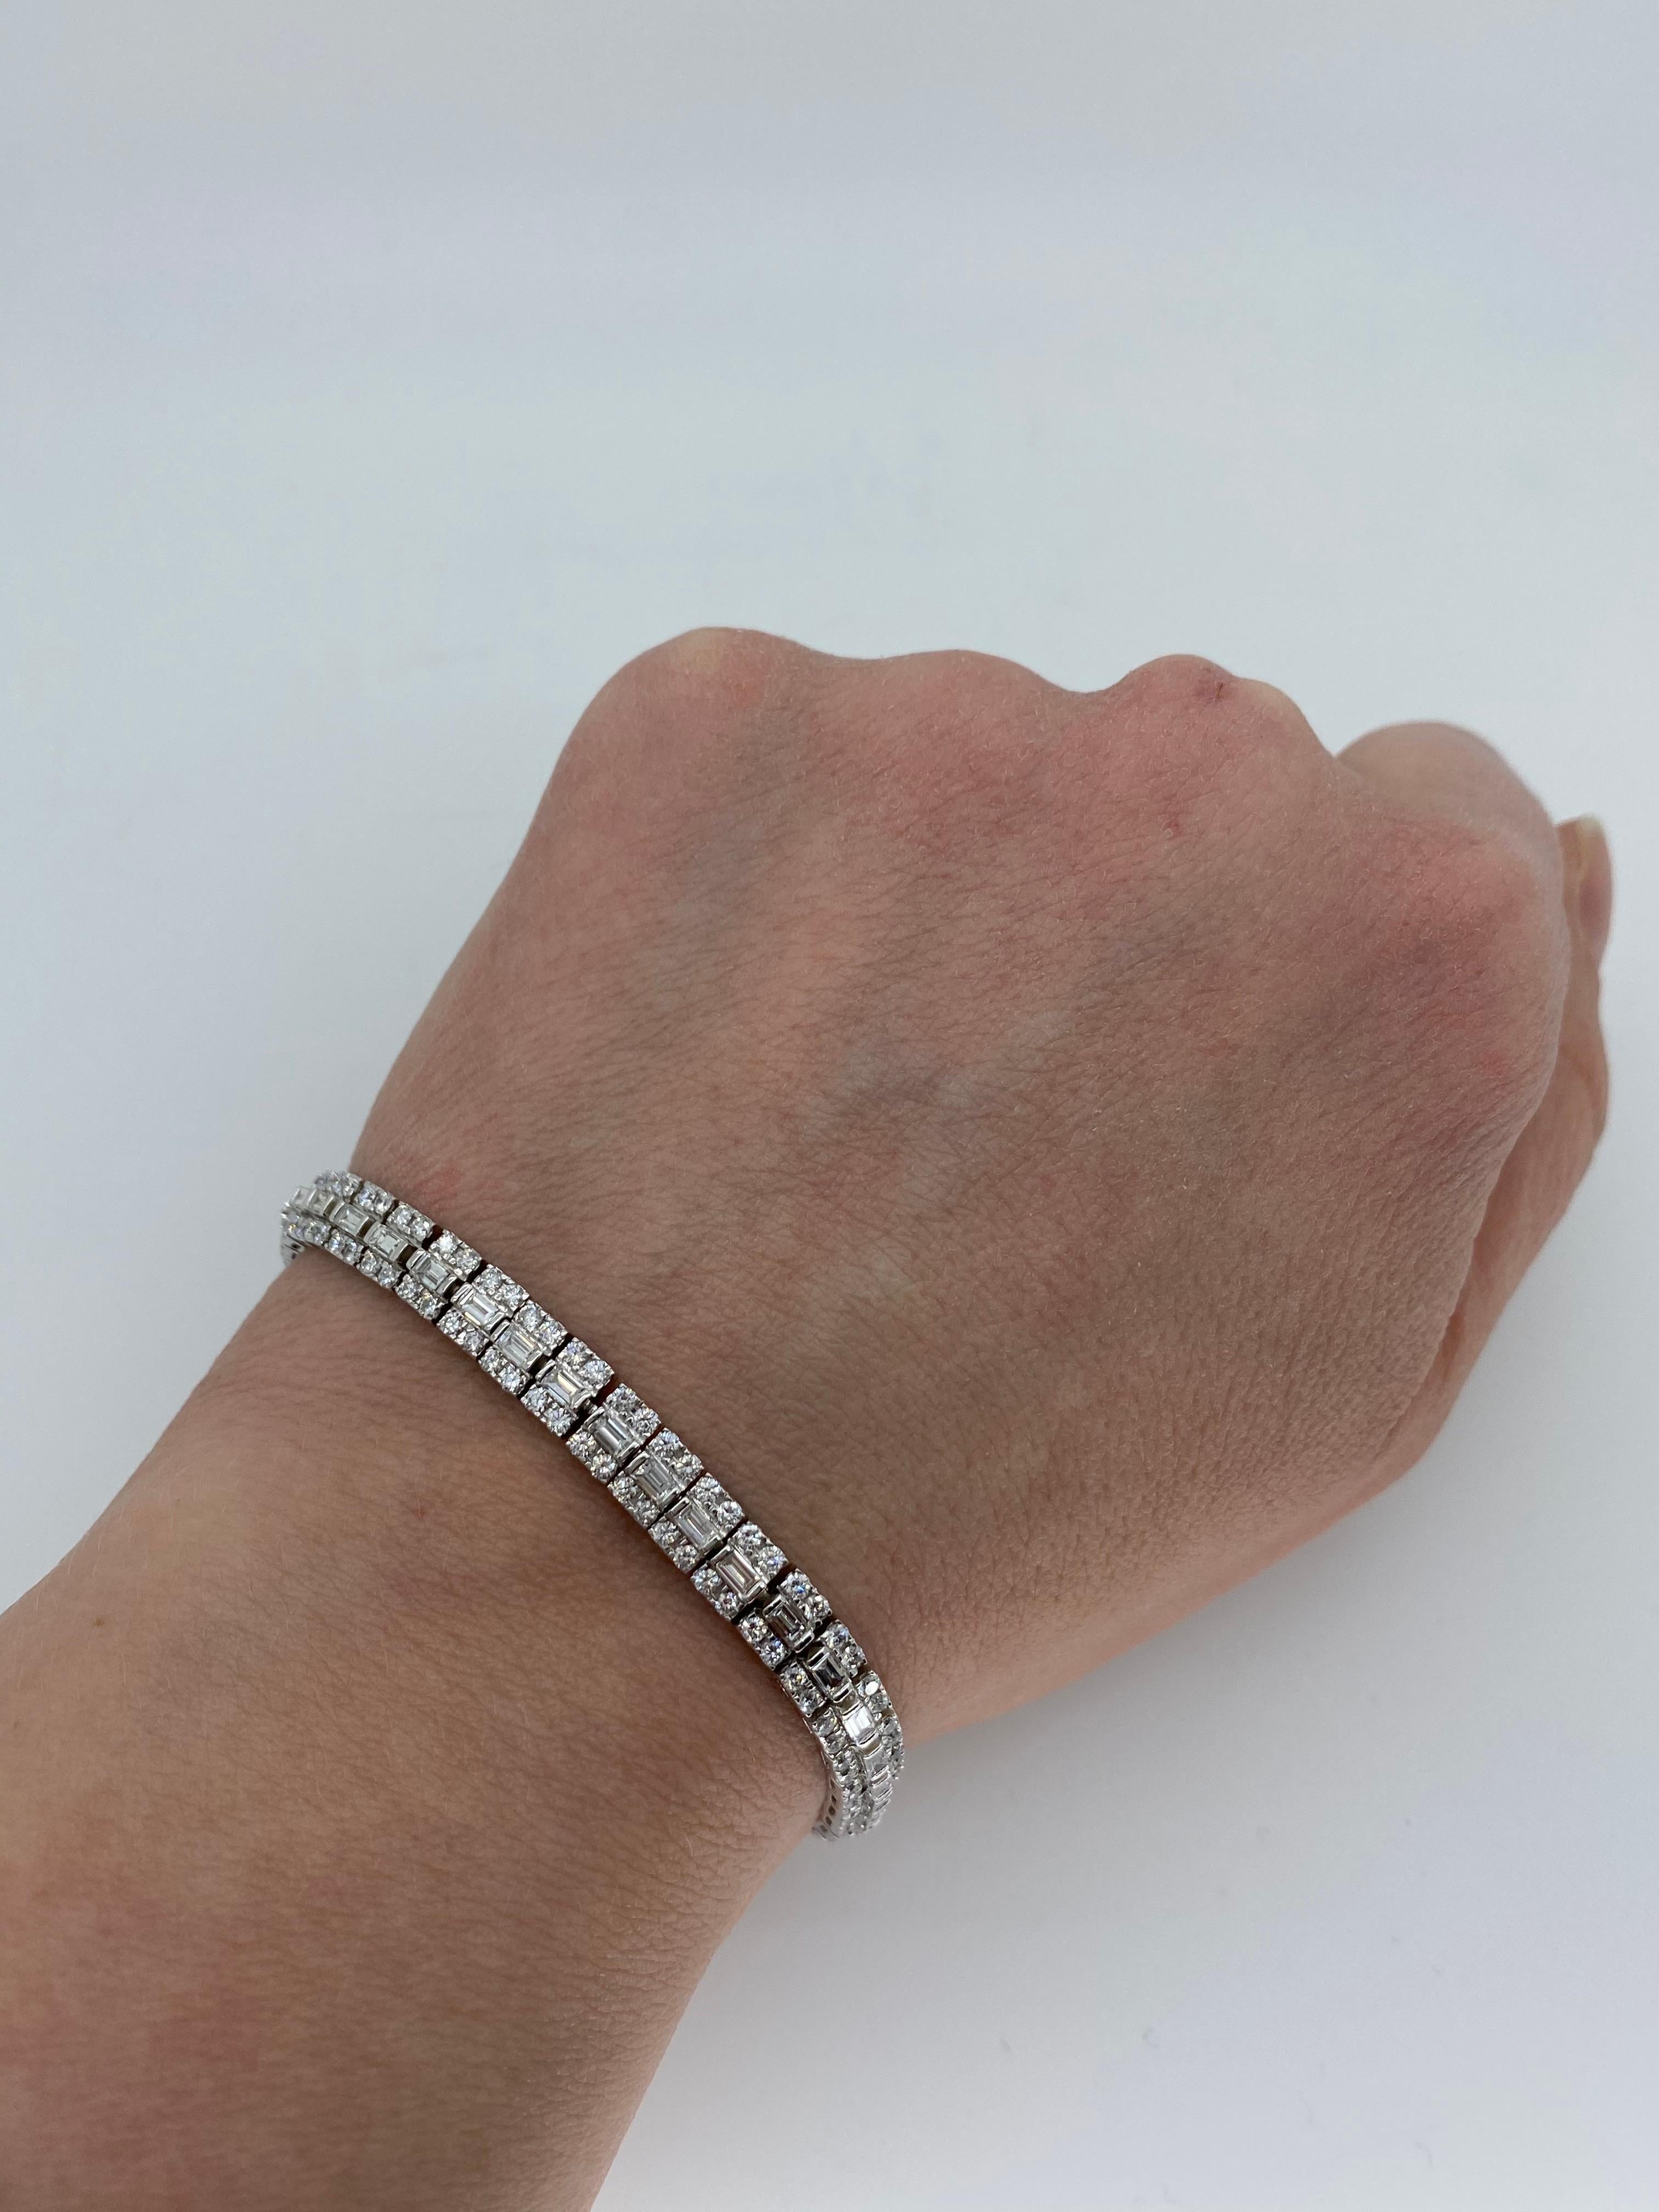 Approximately 4.60CTW baguette and round brilliant cut diamond tennis bracelet crafted in 18k white gold. 

Diamond Carat Weight: Approximately 4.60CTW
Diamond Cut: 172 Round Brilliant Cut Diamonds and 43 Baguette Cut Diamonds
Color: Average: